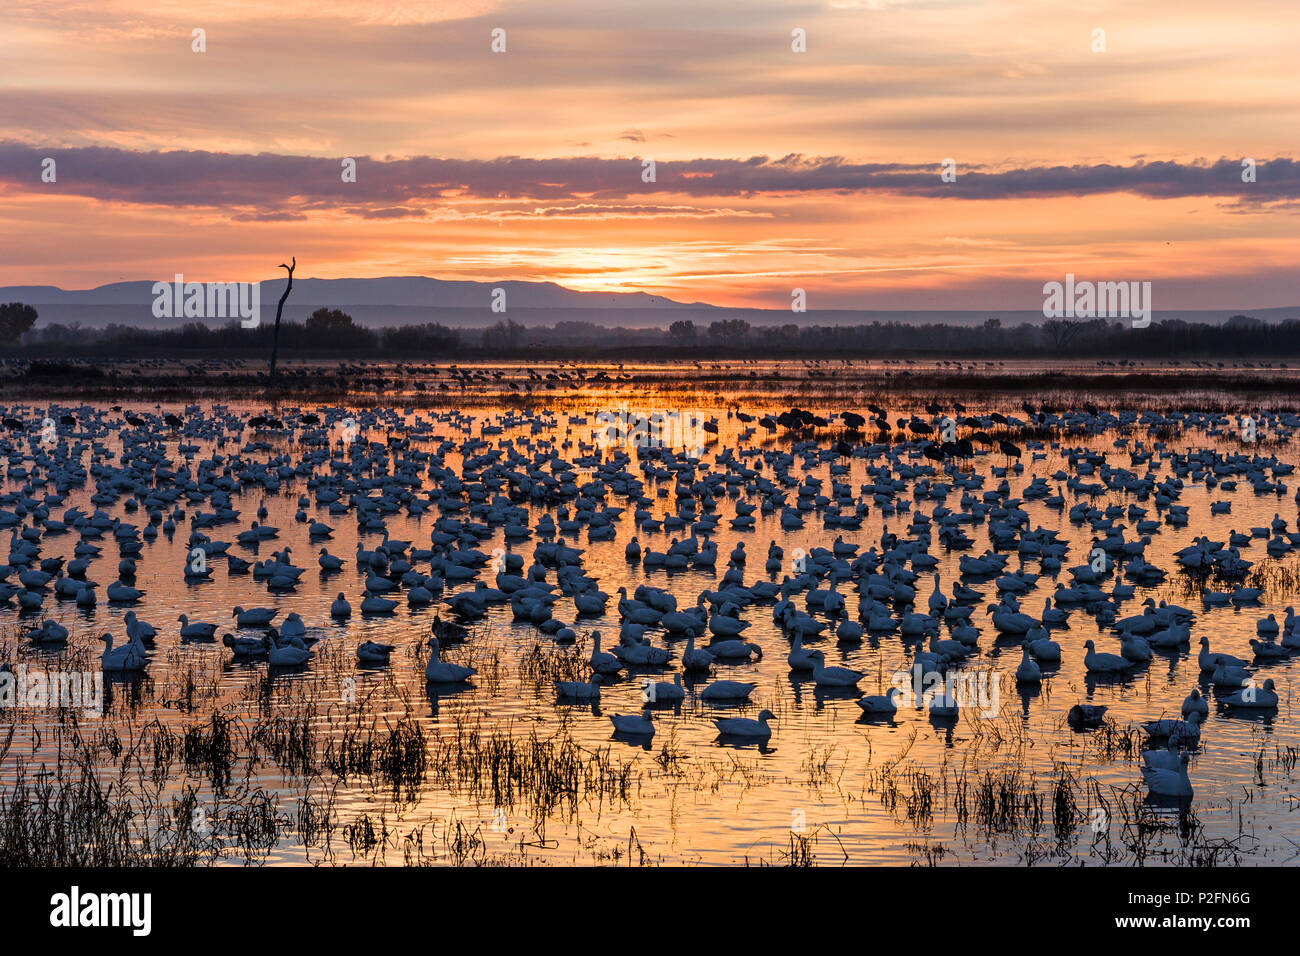 Snow Geese at sunrise, Anser caerulescens atlanticus, Chen caerulescens, Bosque del Apache, New Mexico, USA, outdoors, day, nobo Stock Photo